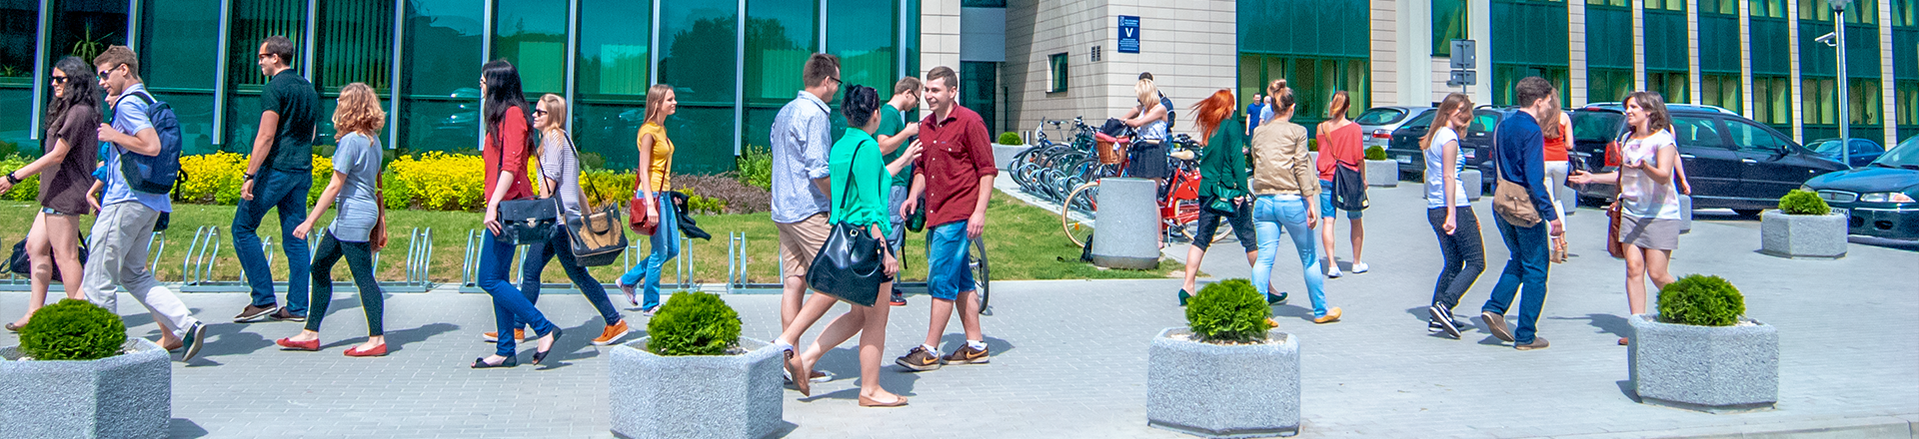 Study in English at The Rzeszow University of Technology